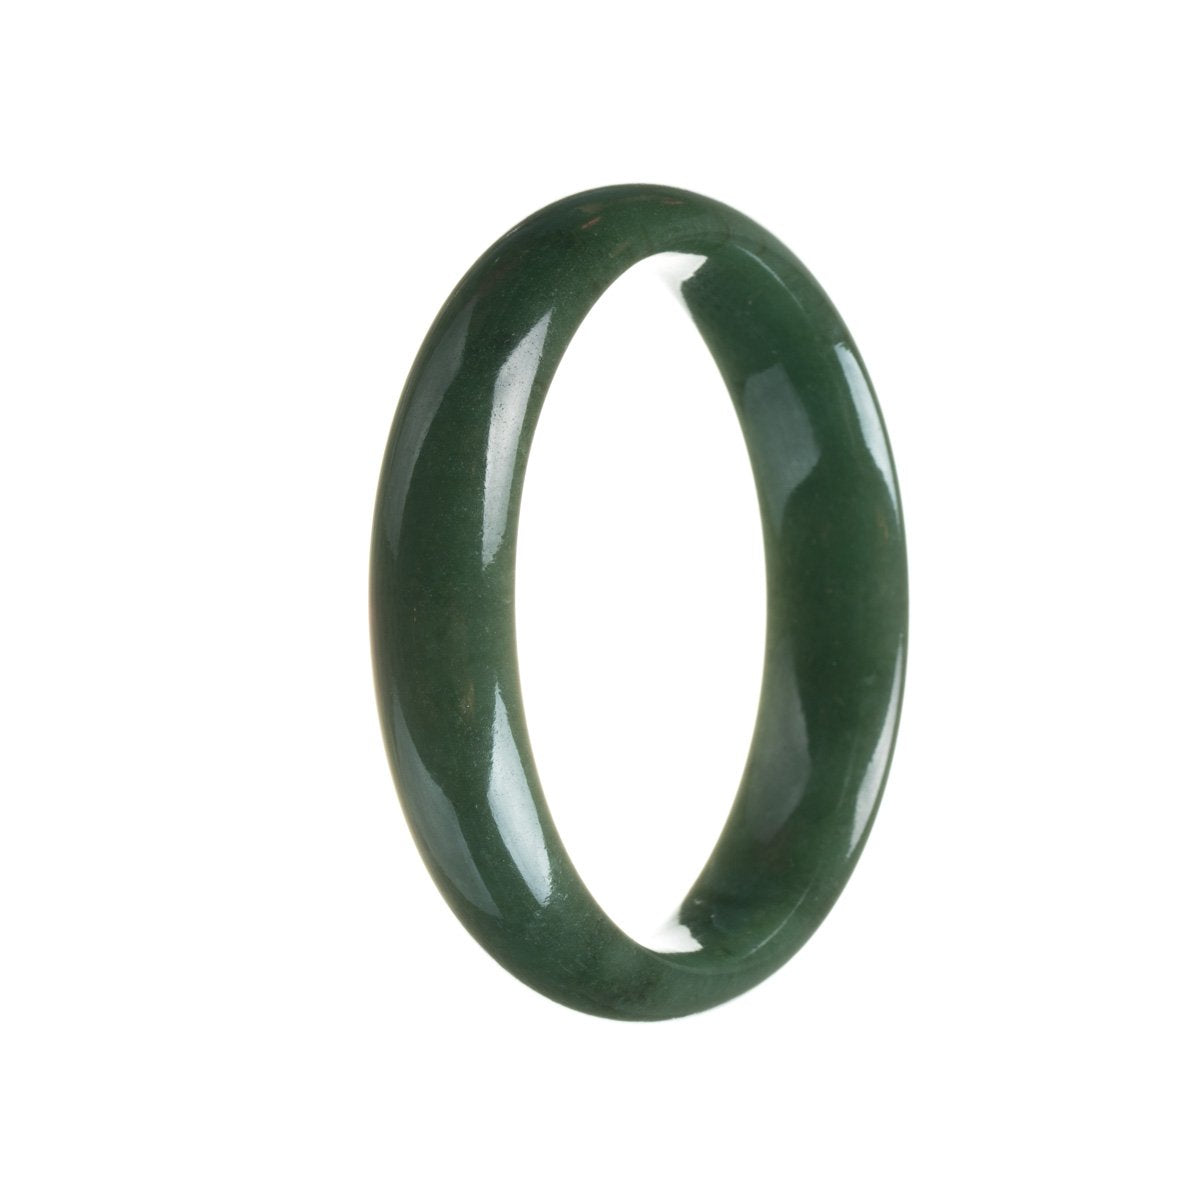 A close-up photo of a deep green Burmese Jade bracelet, featuring a half-moon shape. This bracelet is certified as natural and is 57mm in size. It is a stylish piece of jewelry from the MAYS™ collection.